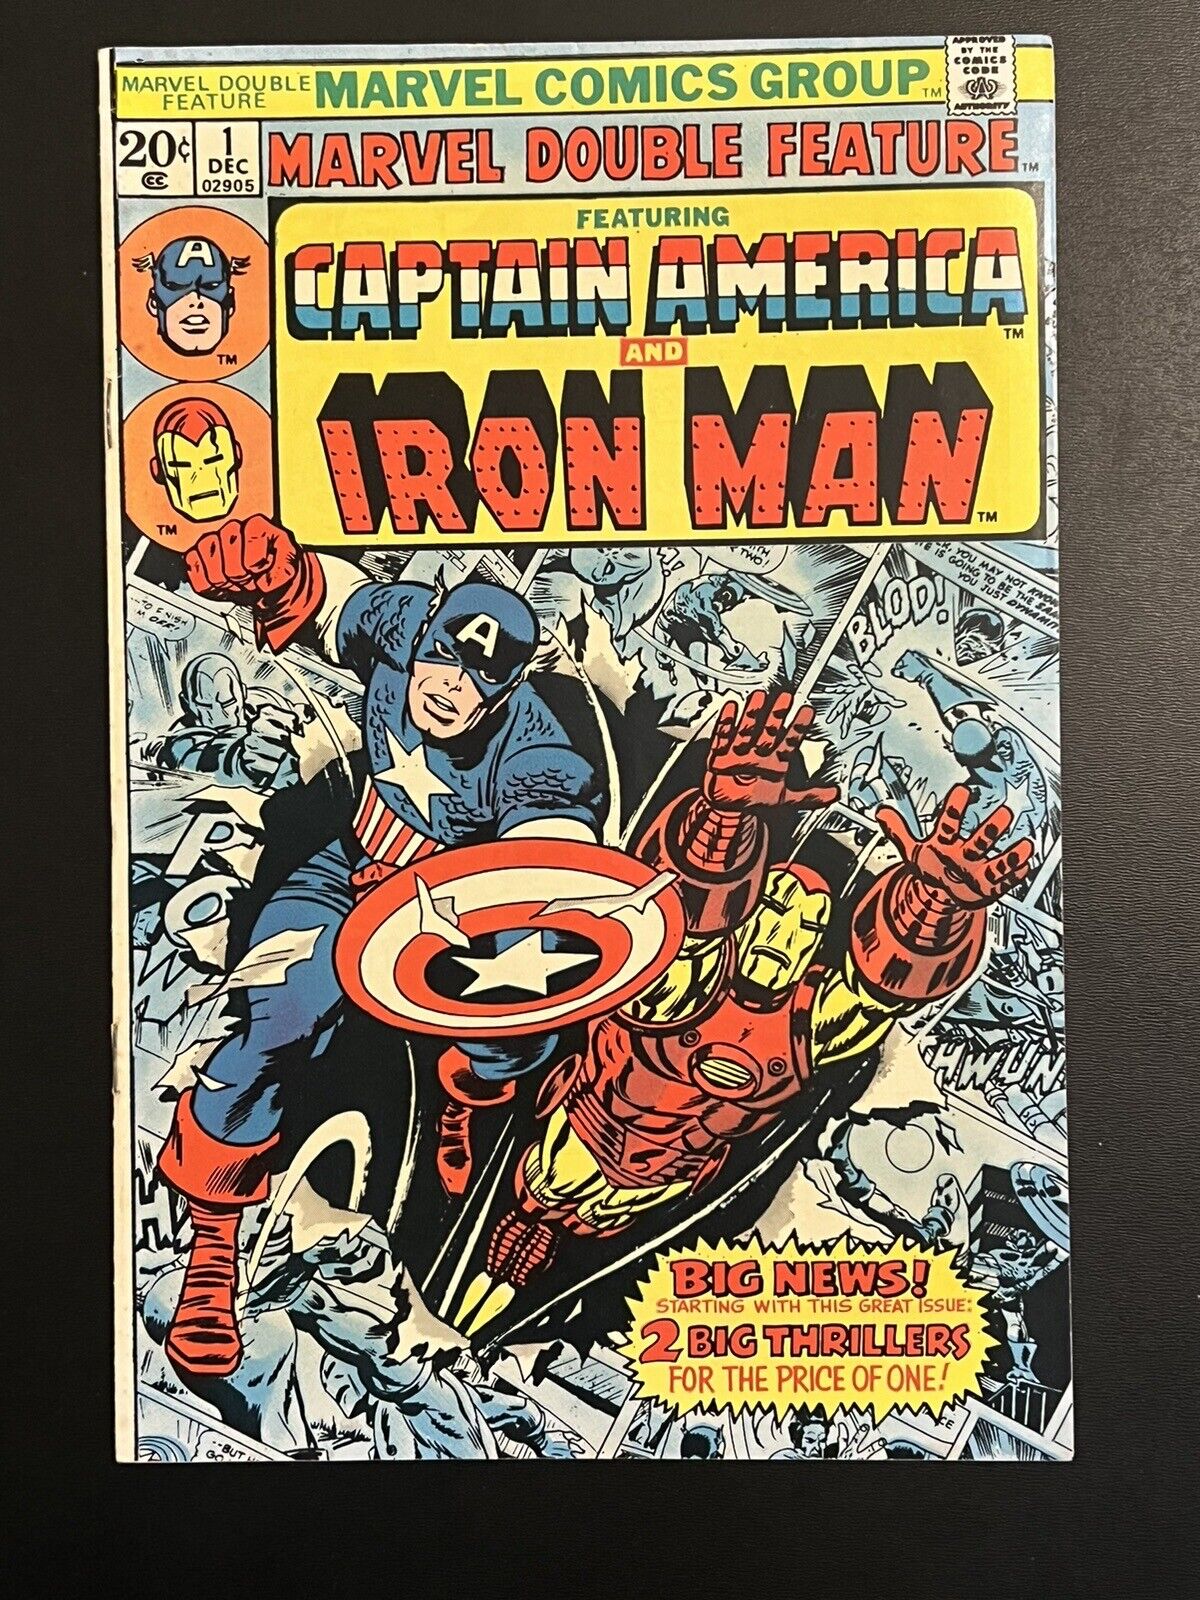 Marvel Double Feature #1 Captain America And Iron Man (1973 Marvel Comics)